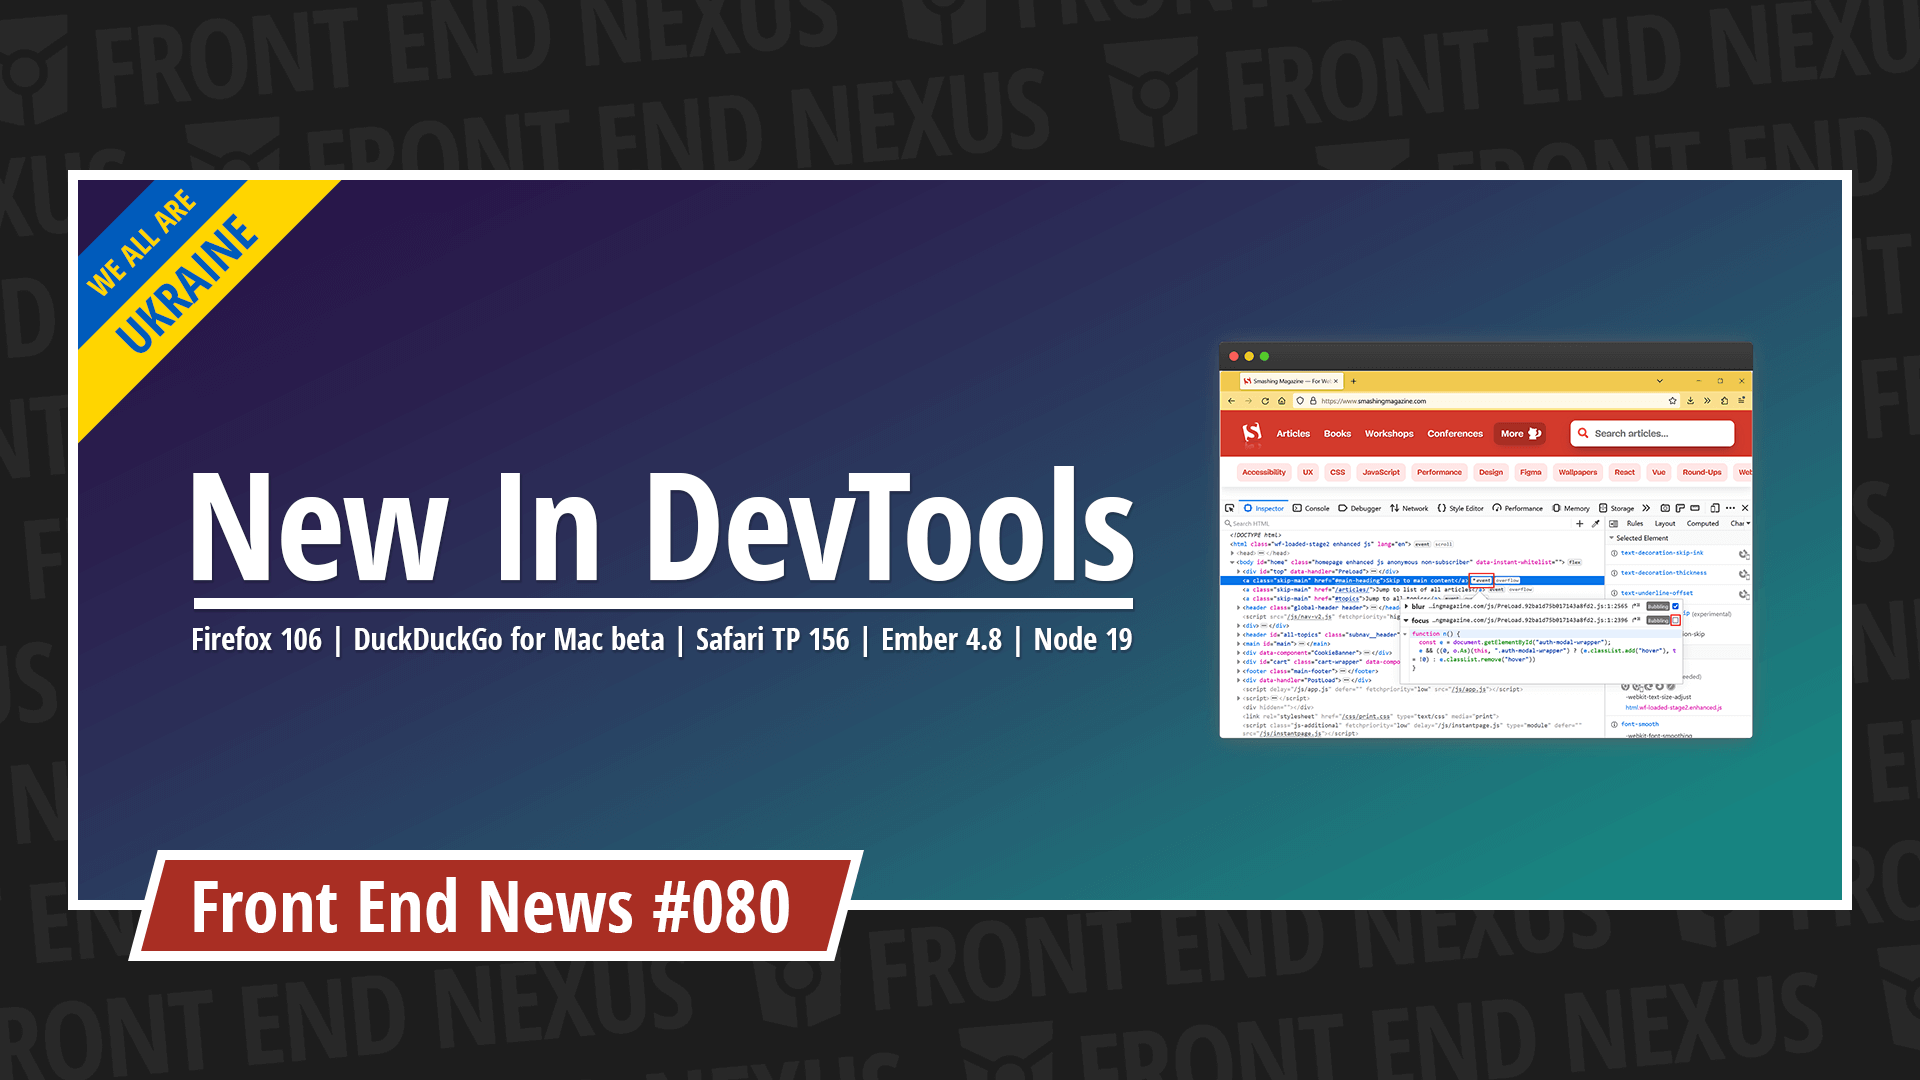 New In DevTools, Firefox 106, DuckDuckGo for Mac beta, Safari TP 156, Ember 4.8, Node 19, and more | Front End News #080